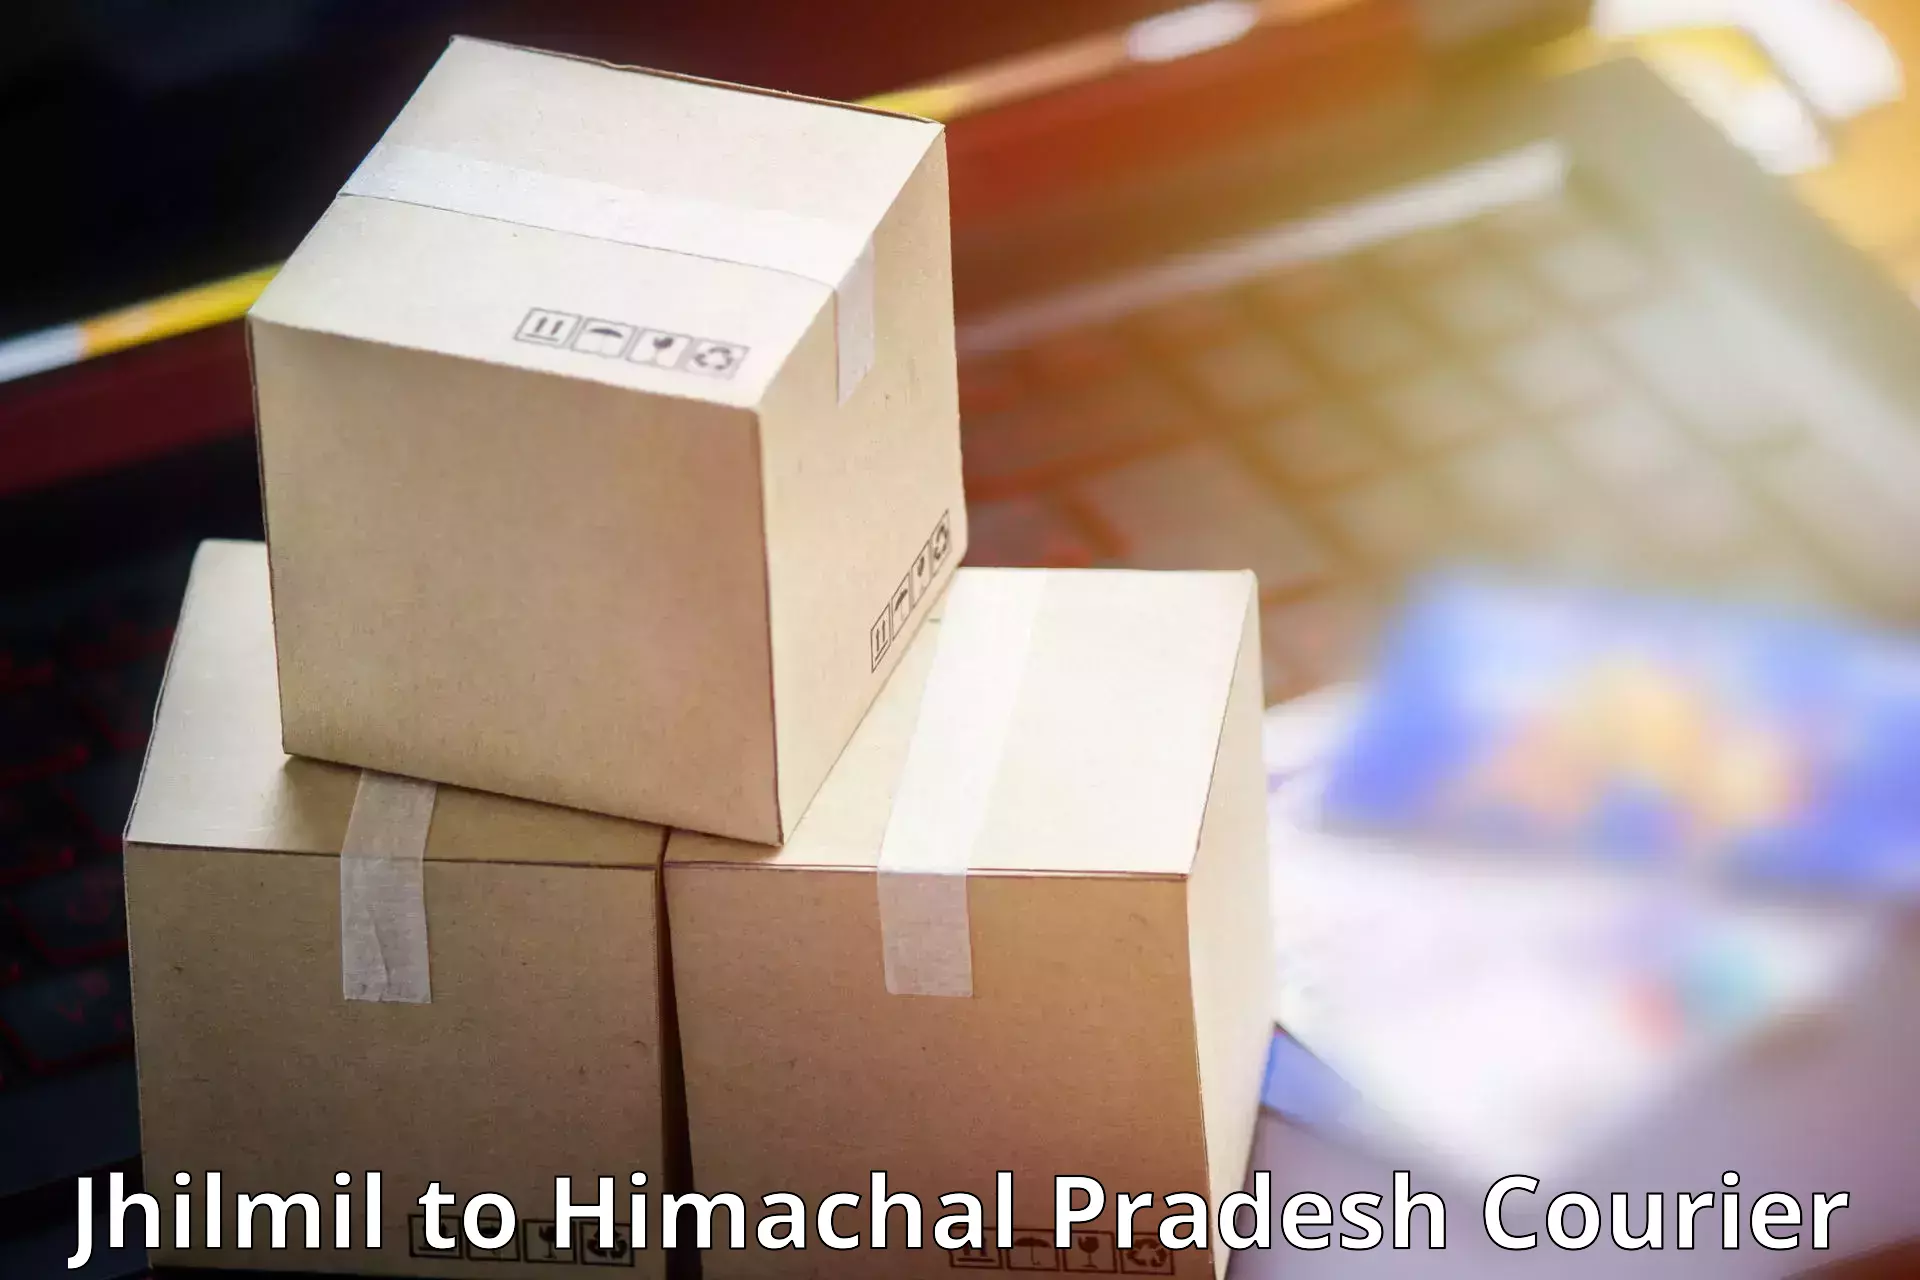 Premium courier solutions Jhilmil to Waknaghat